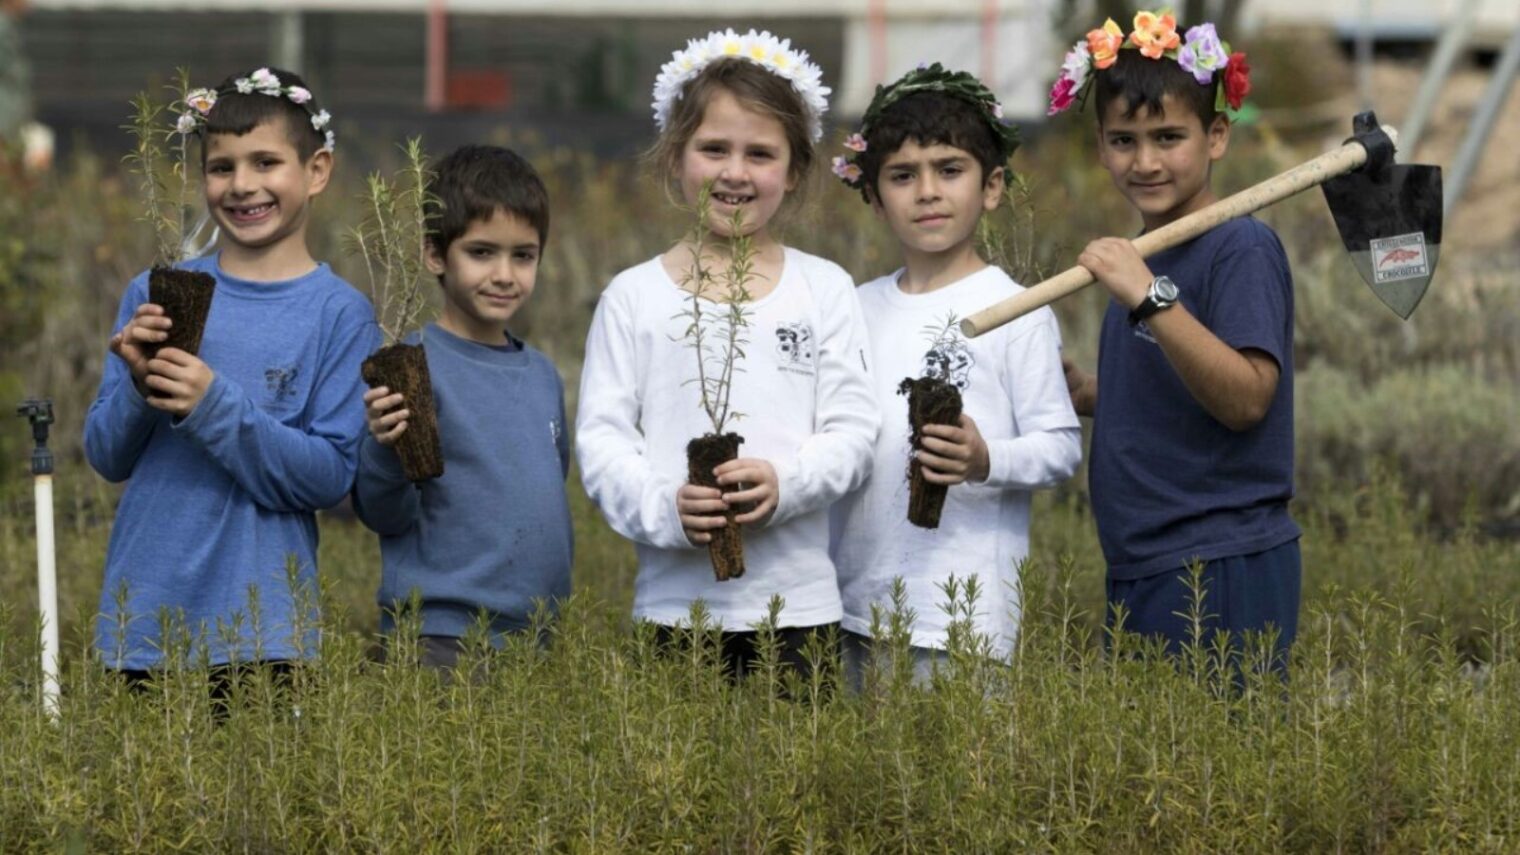 Israeli children planting trees in KKL-JNF nurseries on Tu B'Shvat, the New Year for Trees. Photo by Yossi Aloni